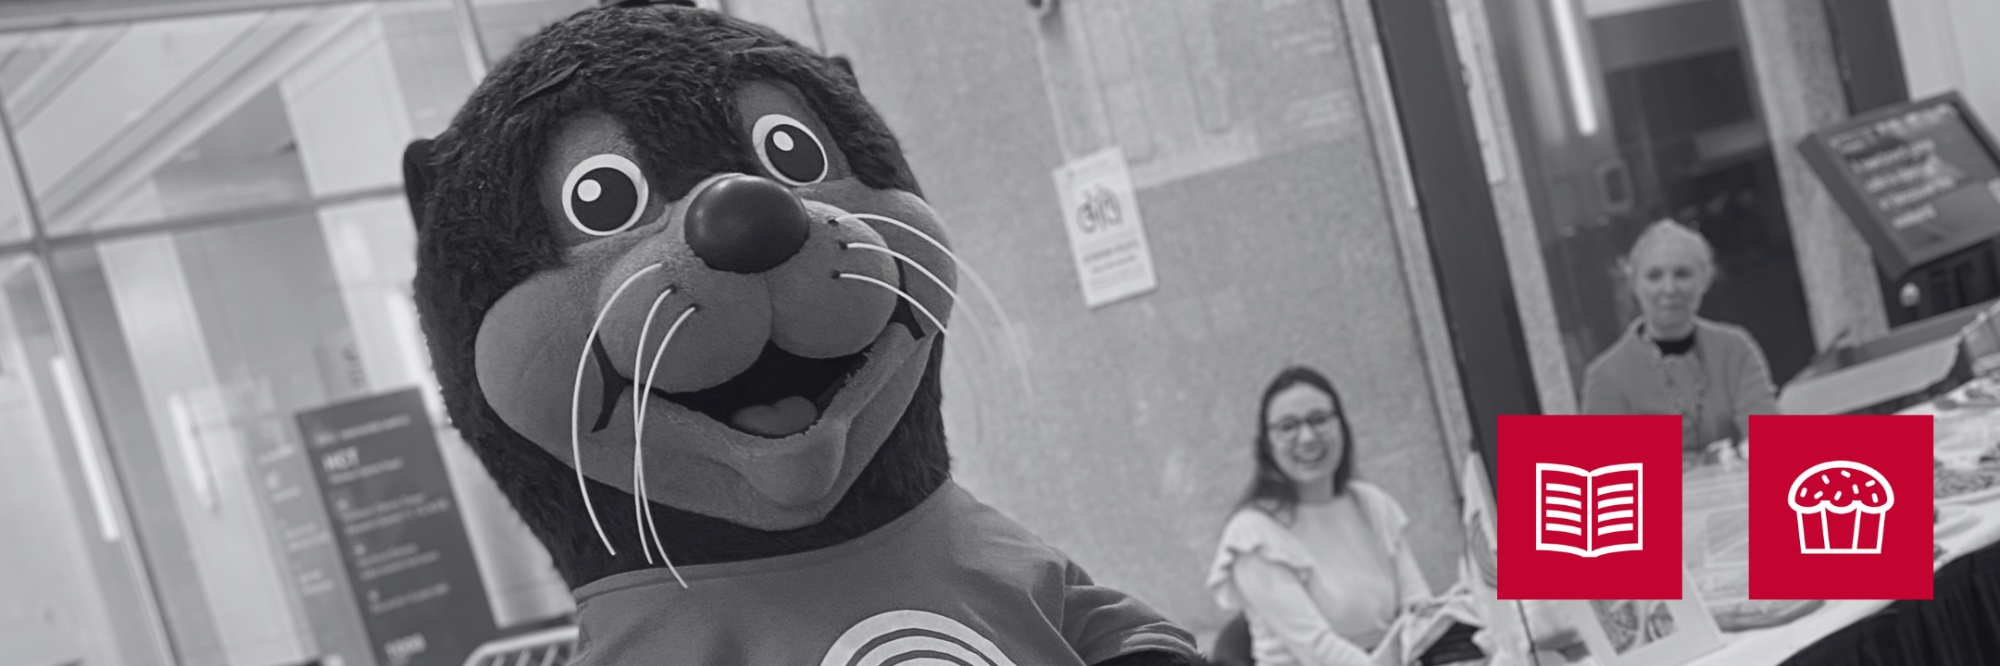 Seymour the sea otter visits the Vancouver book and bake sale